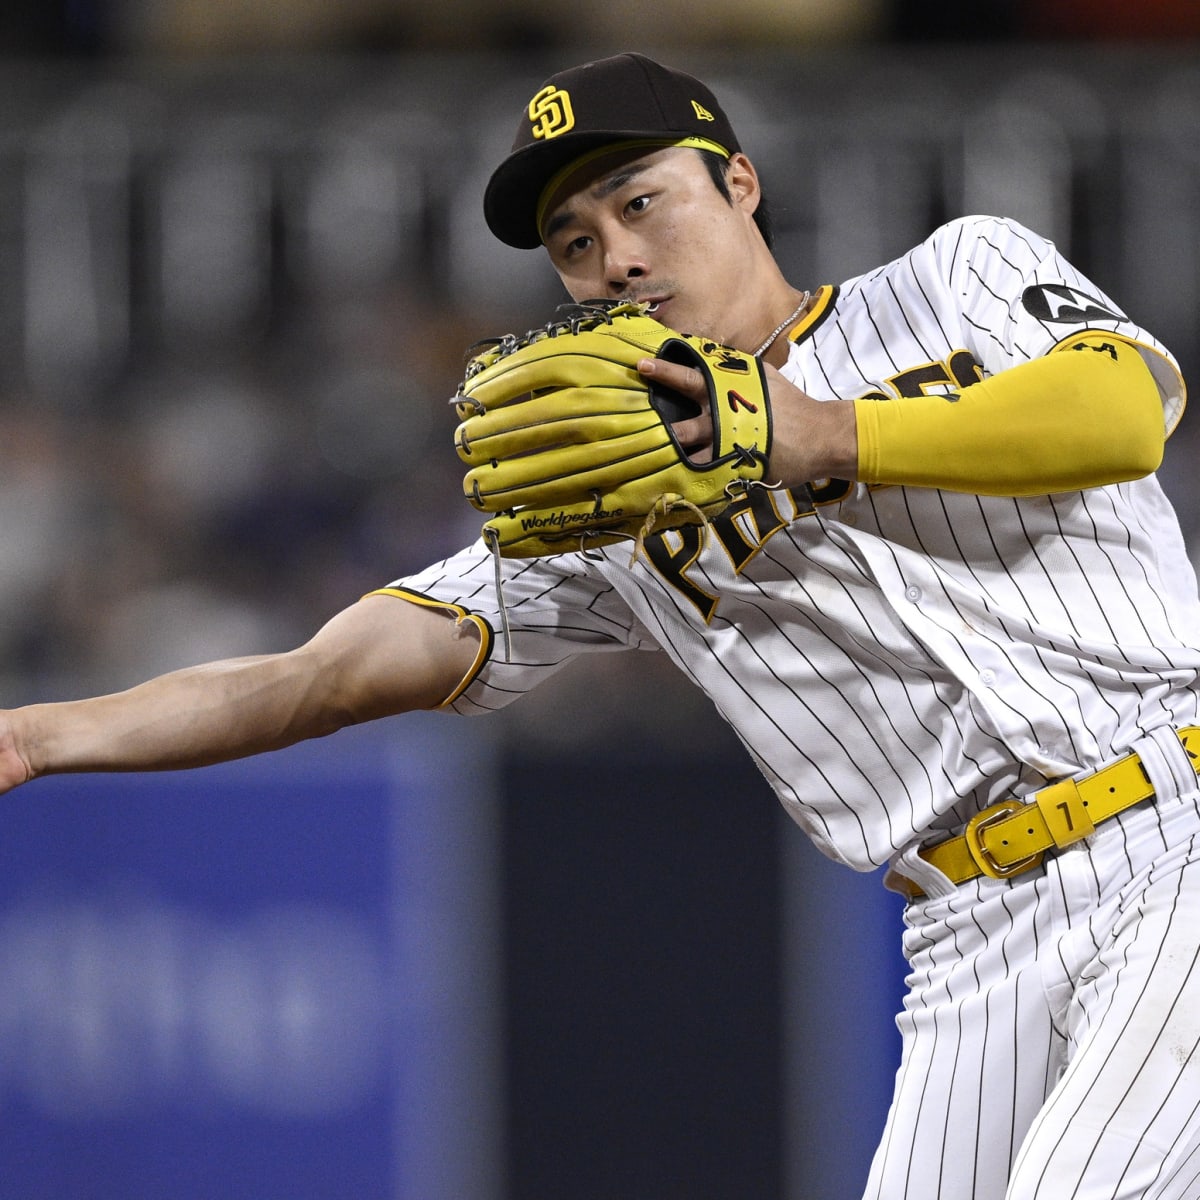 Padres Score: Ha-Seong Kim's Walk-Off Home Run Wins San Diego 3rd Straight  Draft SharePreview Publish - Sports Illustrated Inside The Padres News,  Analysis and More